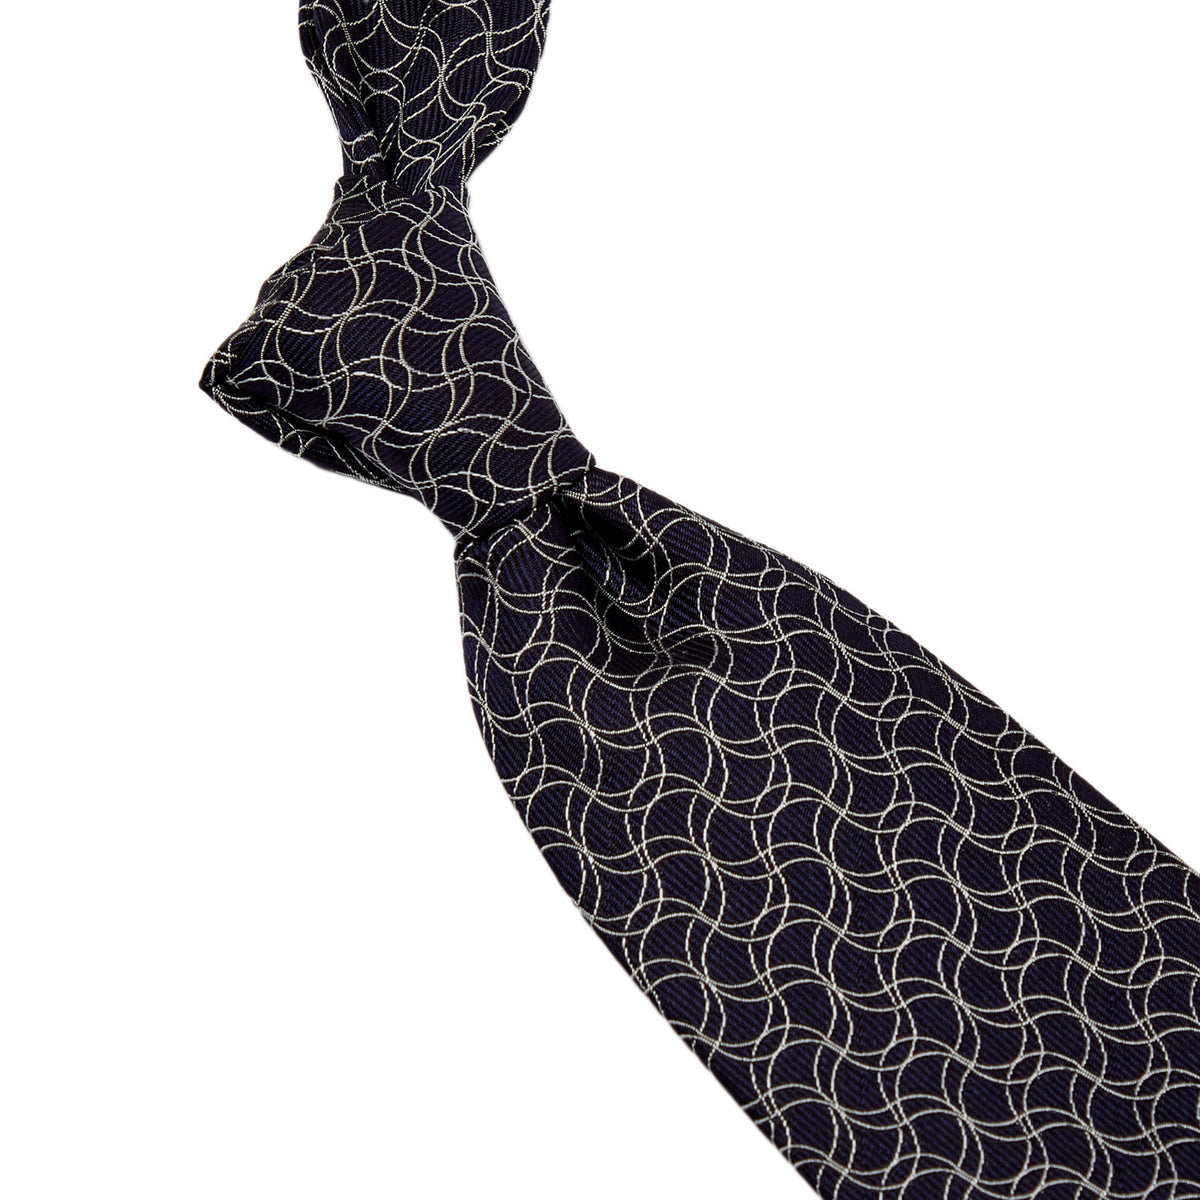 A Sovereign Grade Navy and White Swirl Jacquard Tie from KirbyAllison.com.